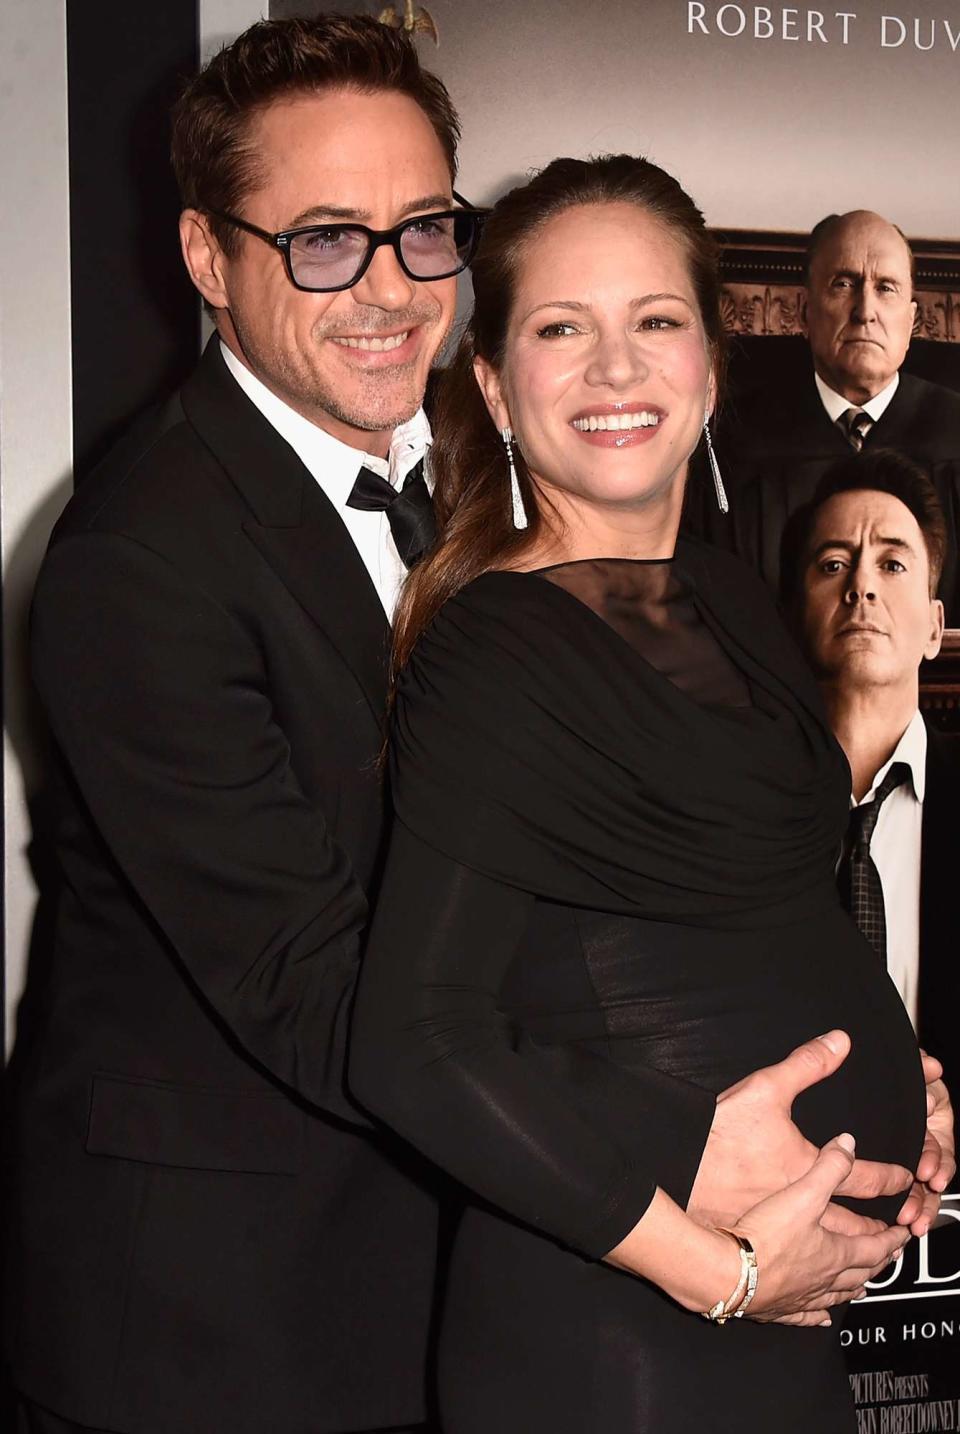 Robert Downey Jr. and his wife Producer Susan Downey arrive for the Warner Bros. Pictures and Village Roadshow Pictures' Premiere of 'the Judge' at AMPAS Samuel Goldwyn Theater on October 1, 2014 in Beverly Hills, California